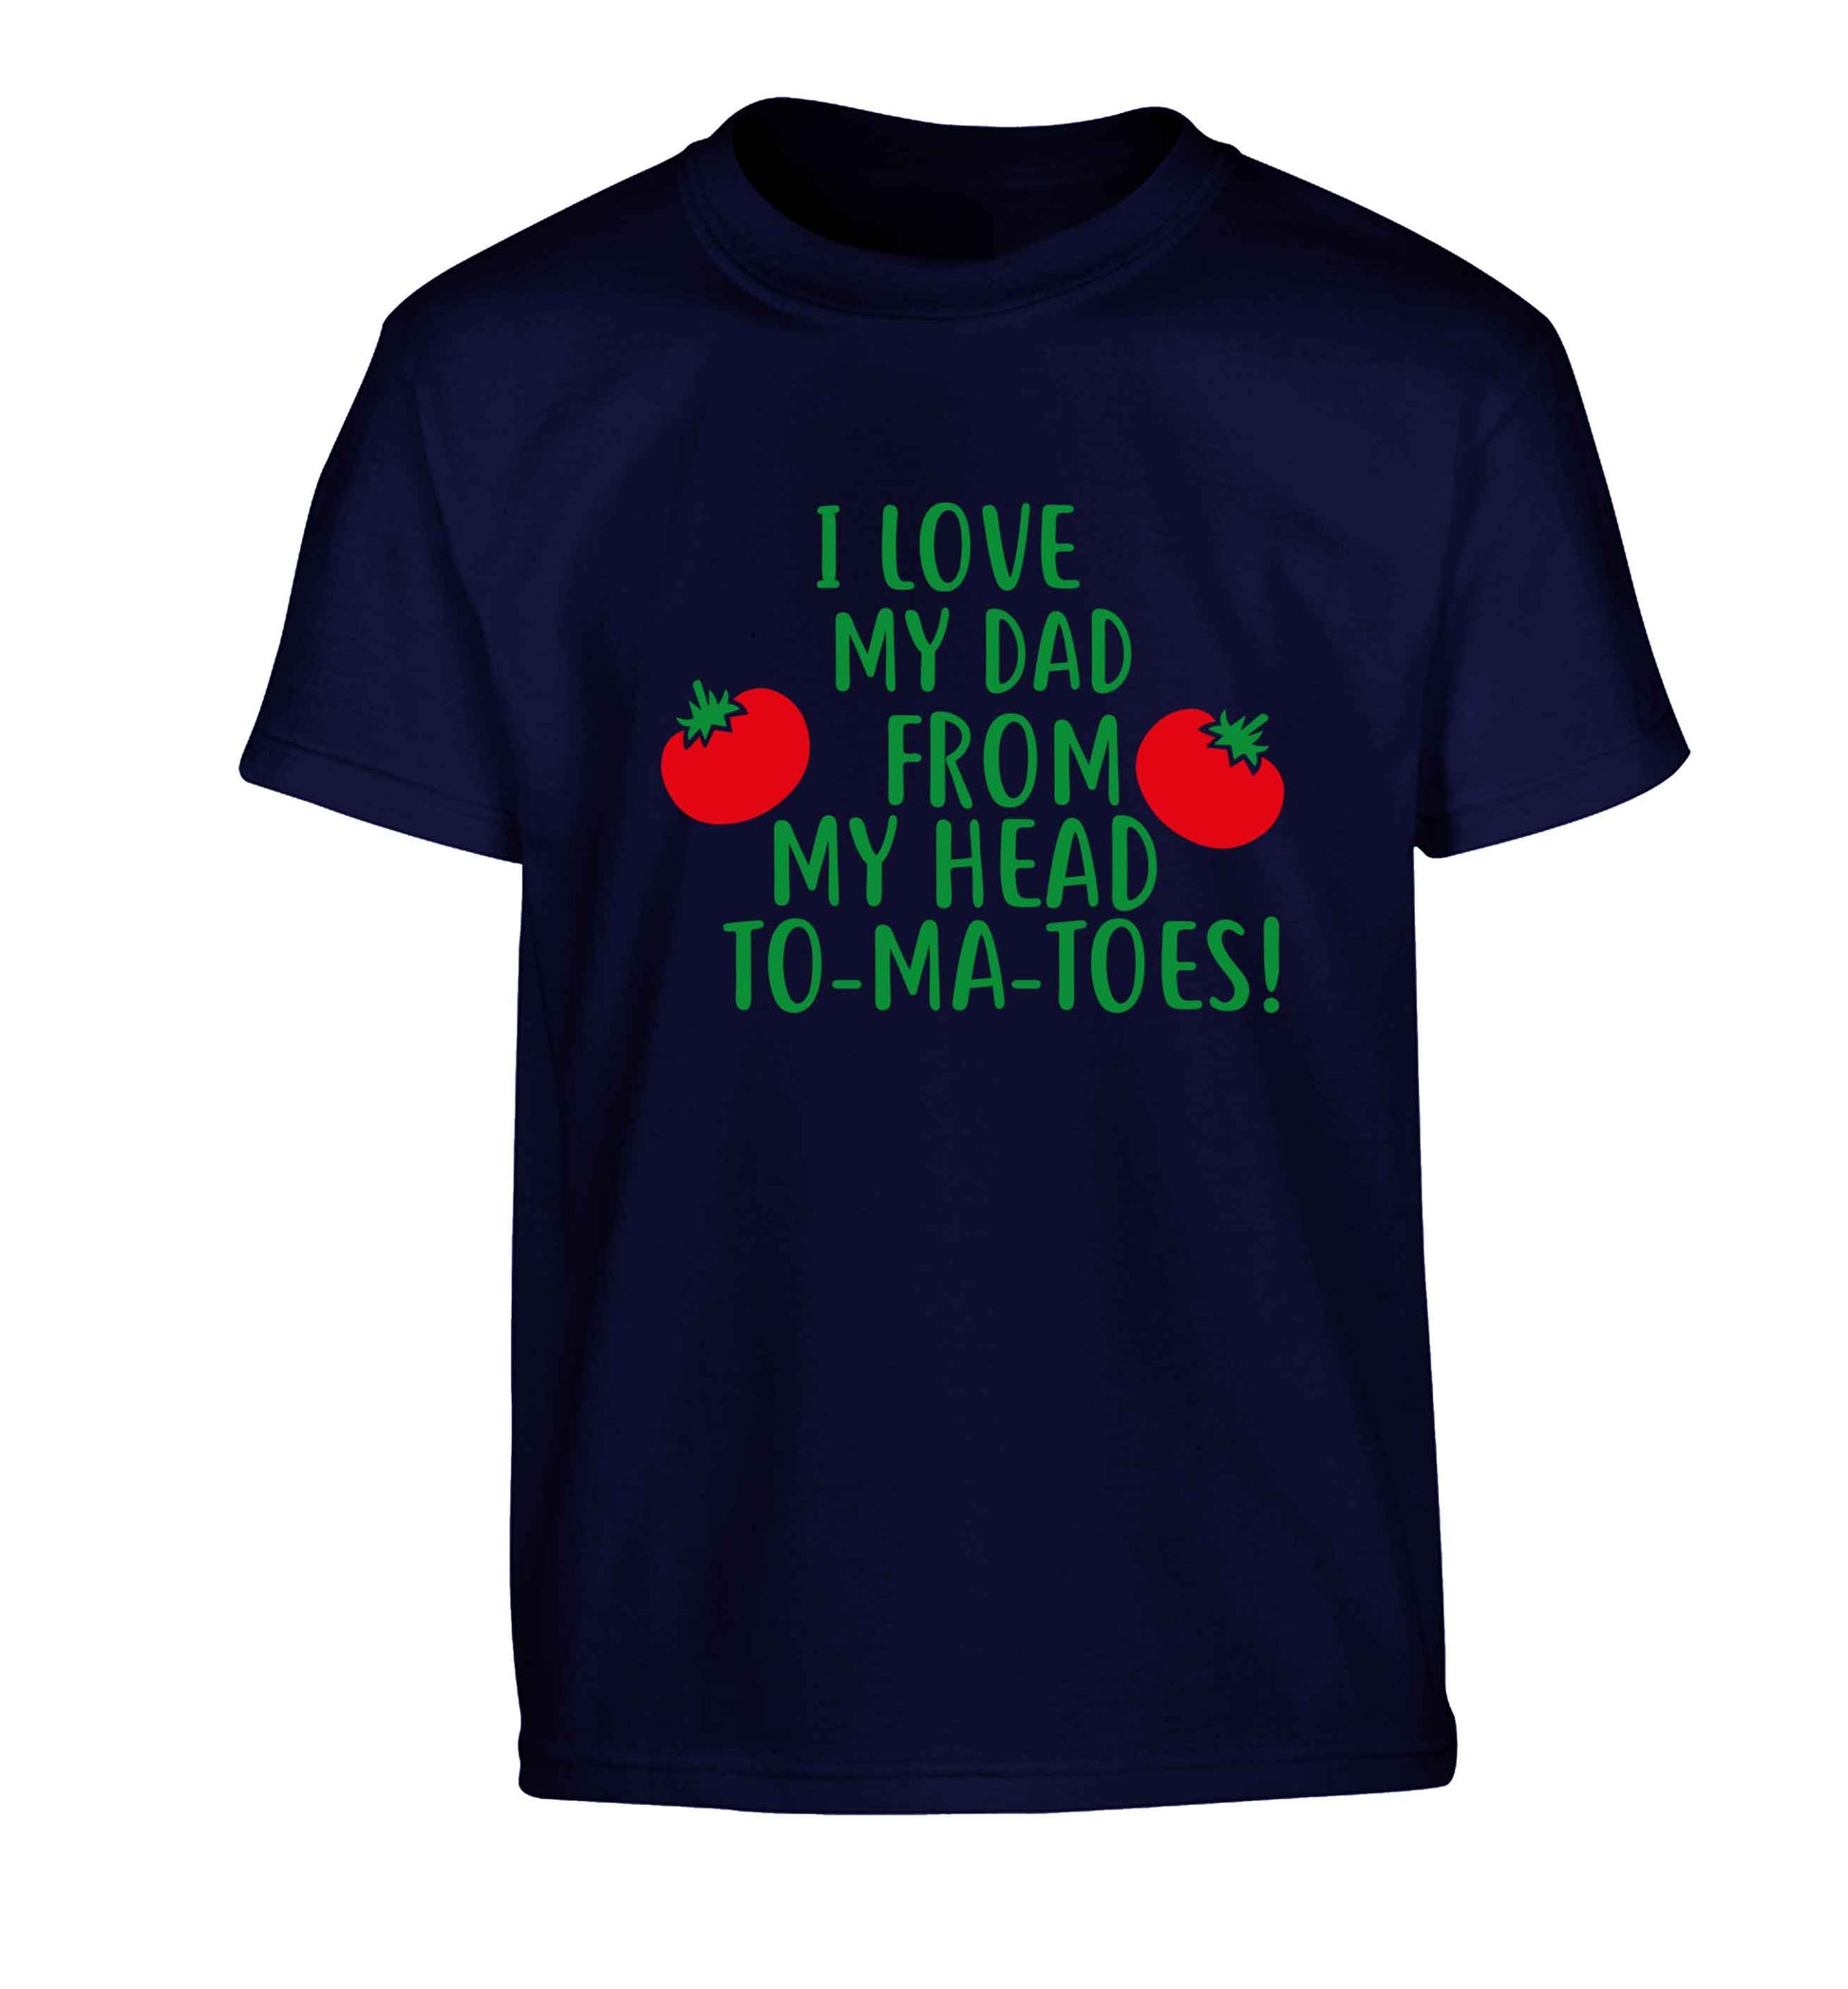 I love my dad from my head to-ma-toes Children's navy Tshirt 12-13 Years